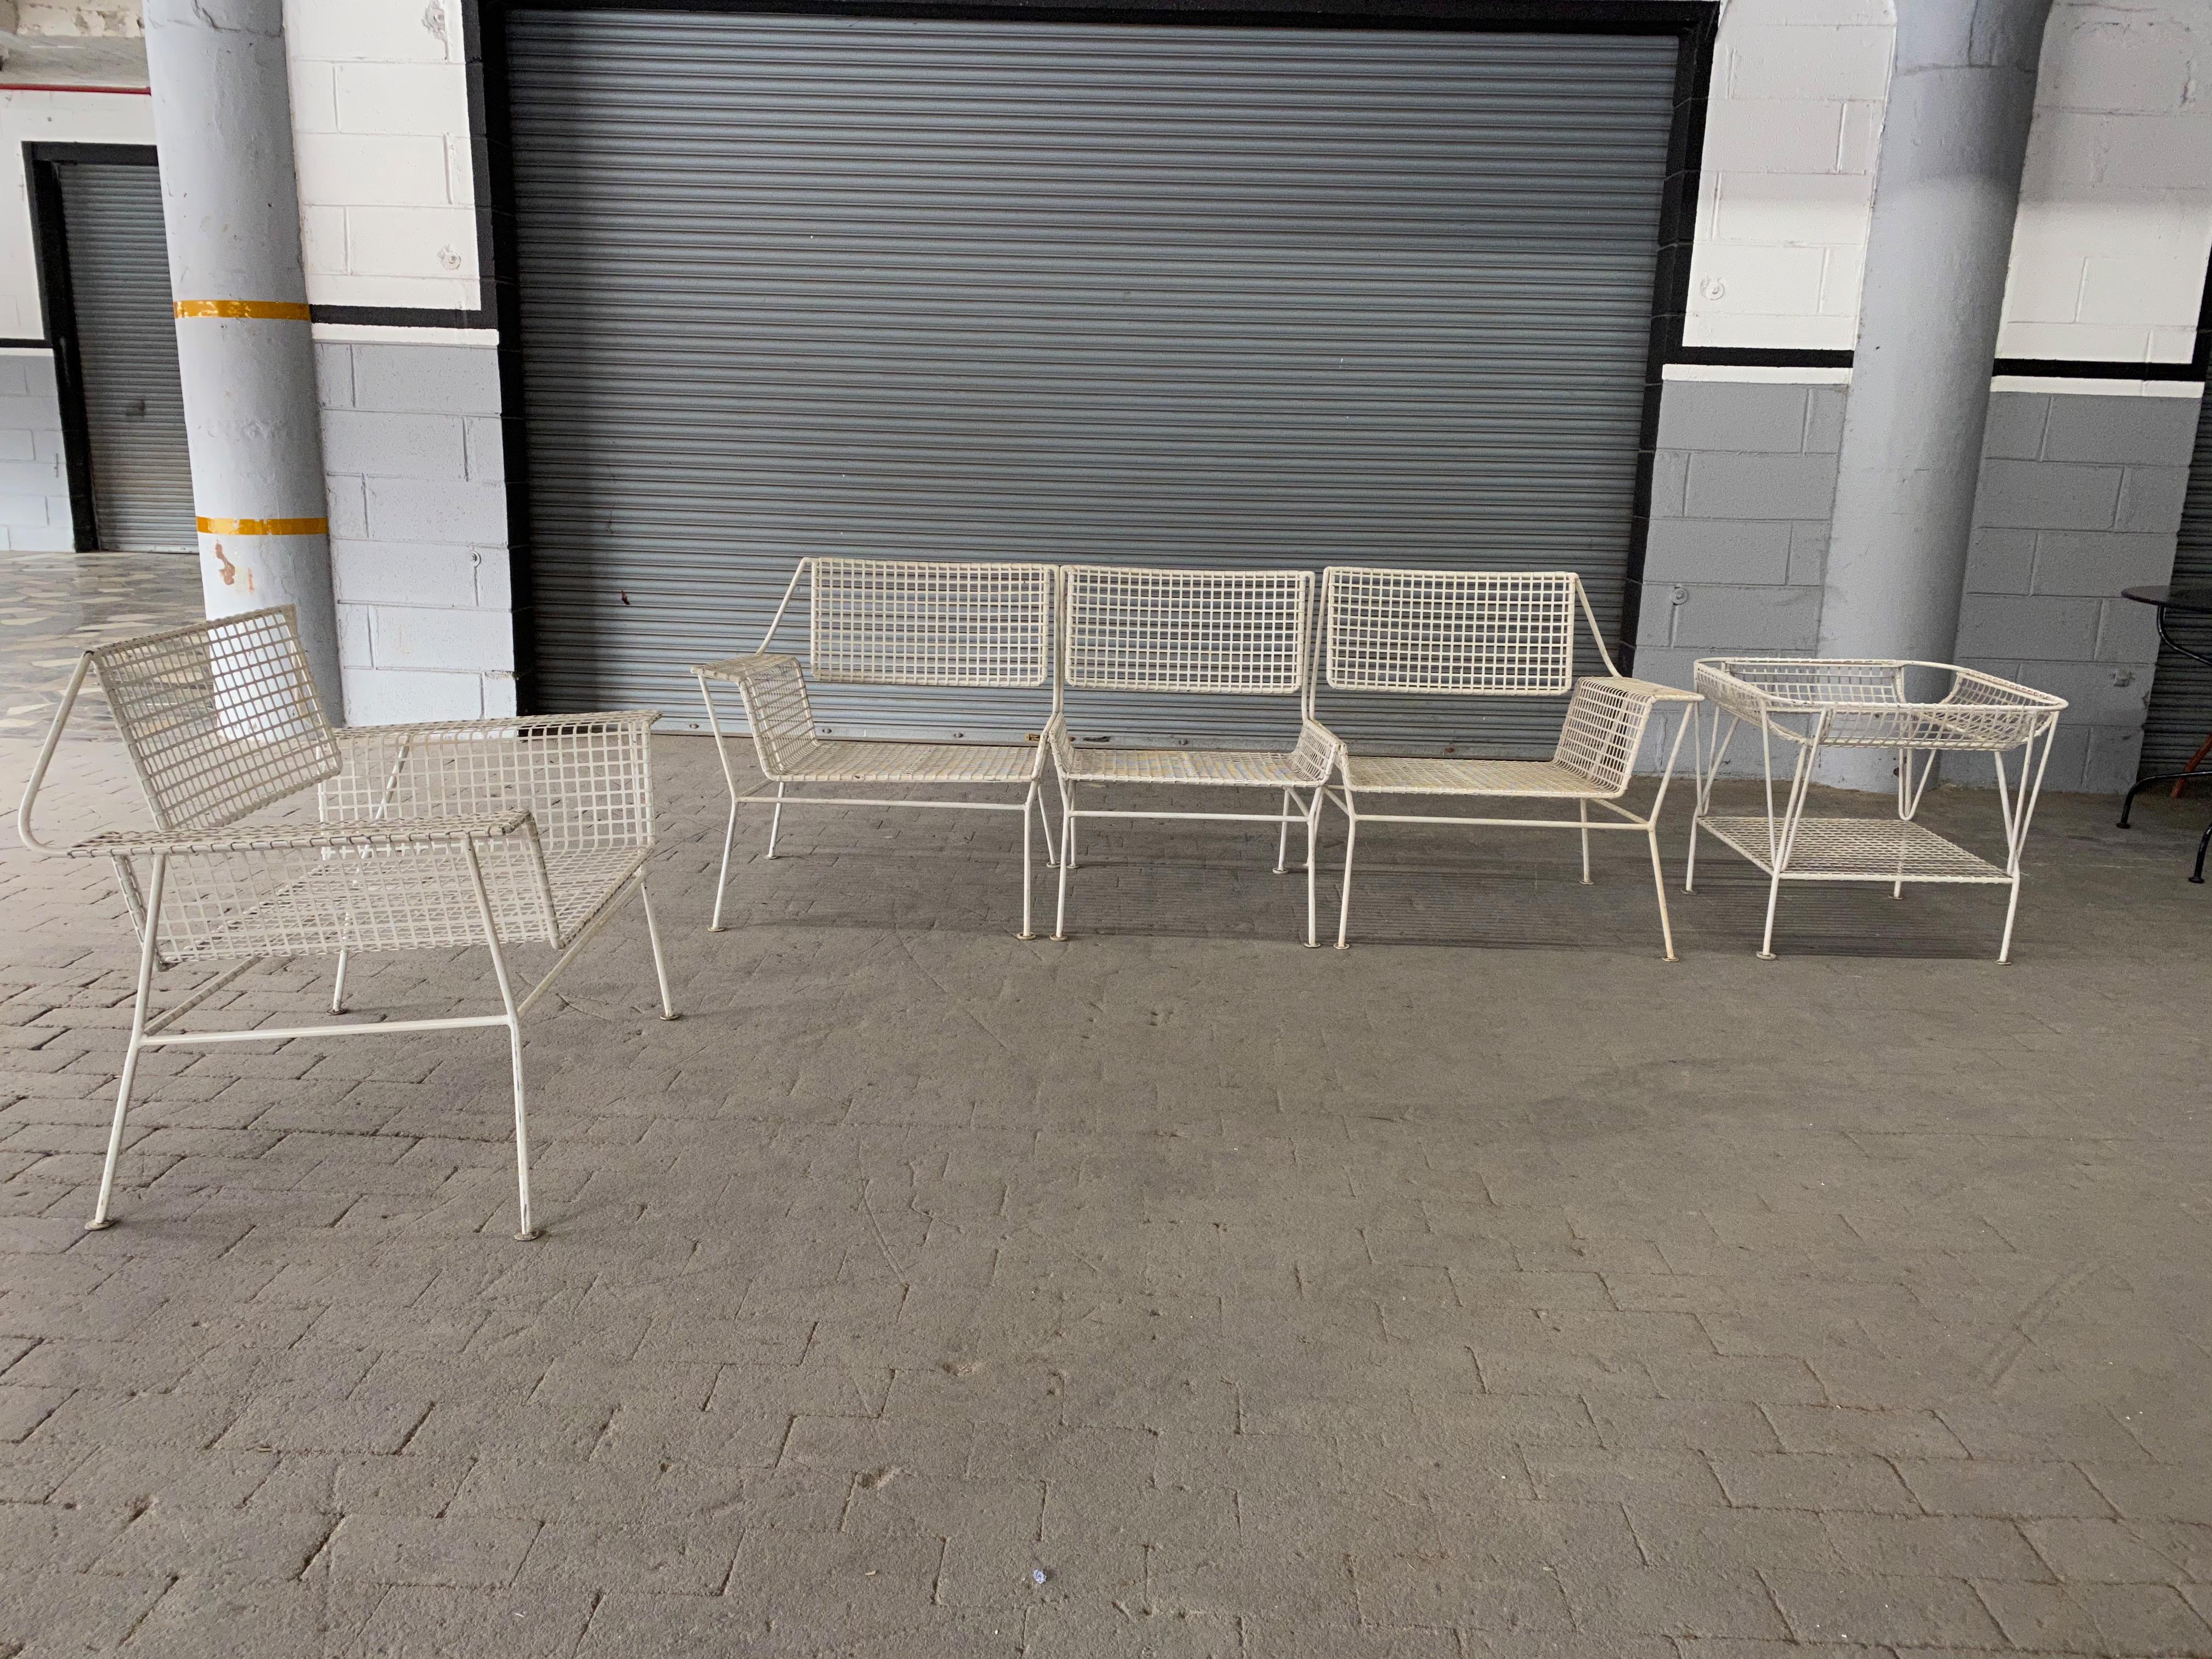 American Mid-Century white iron garden settee in three separate pieces. Very good vintage condition, would be even better with colorful cushions.    Part of a larger set that includes an armchair, a three piece settee, and an end table.
 


